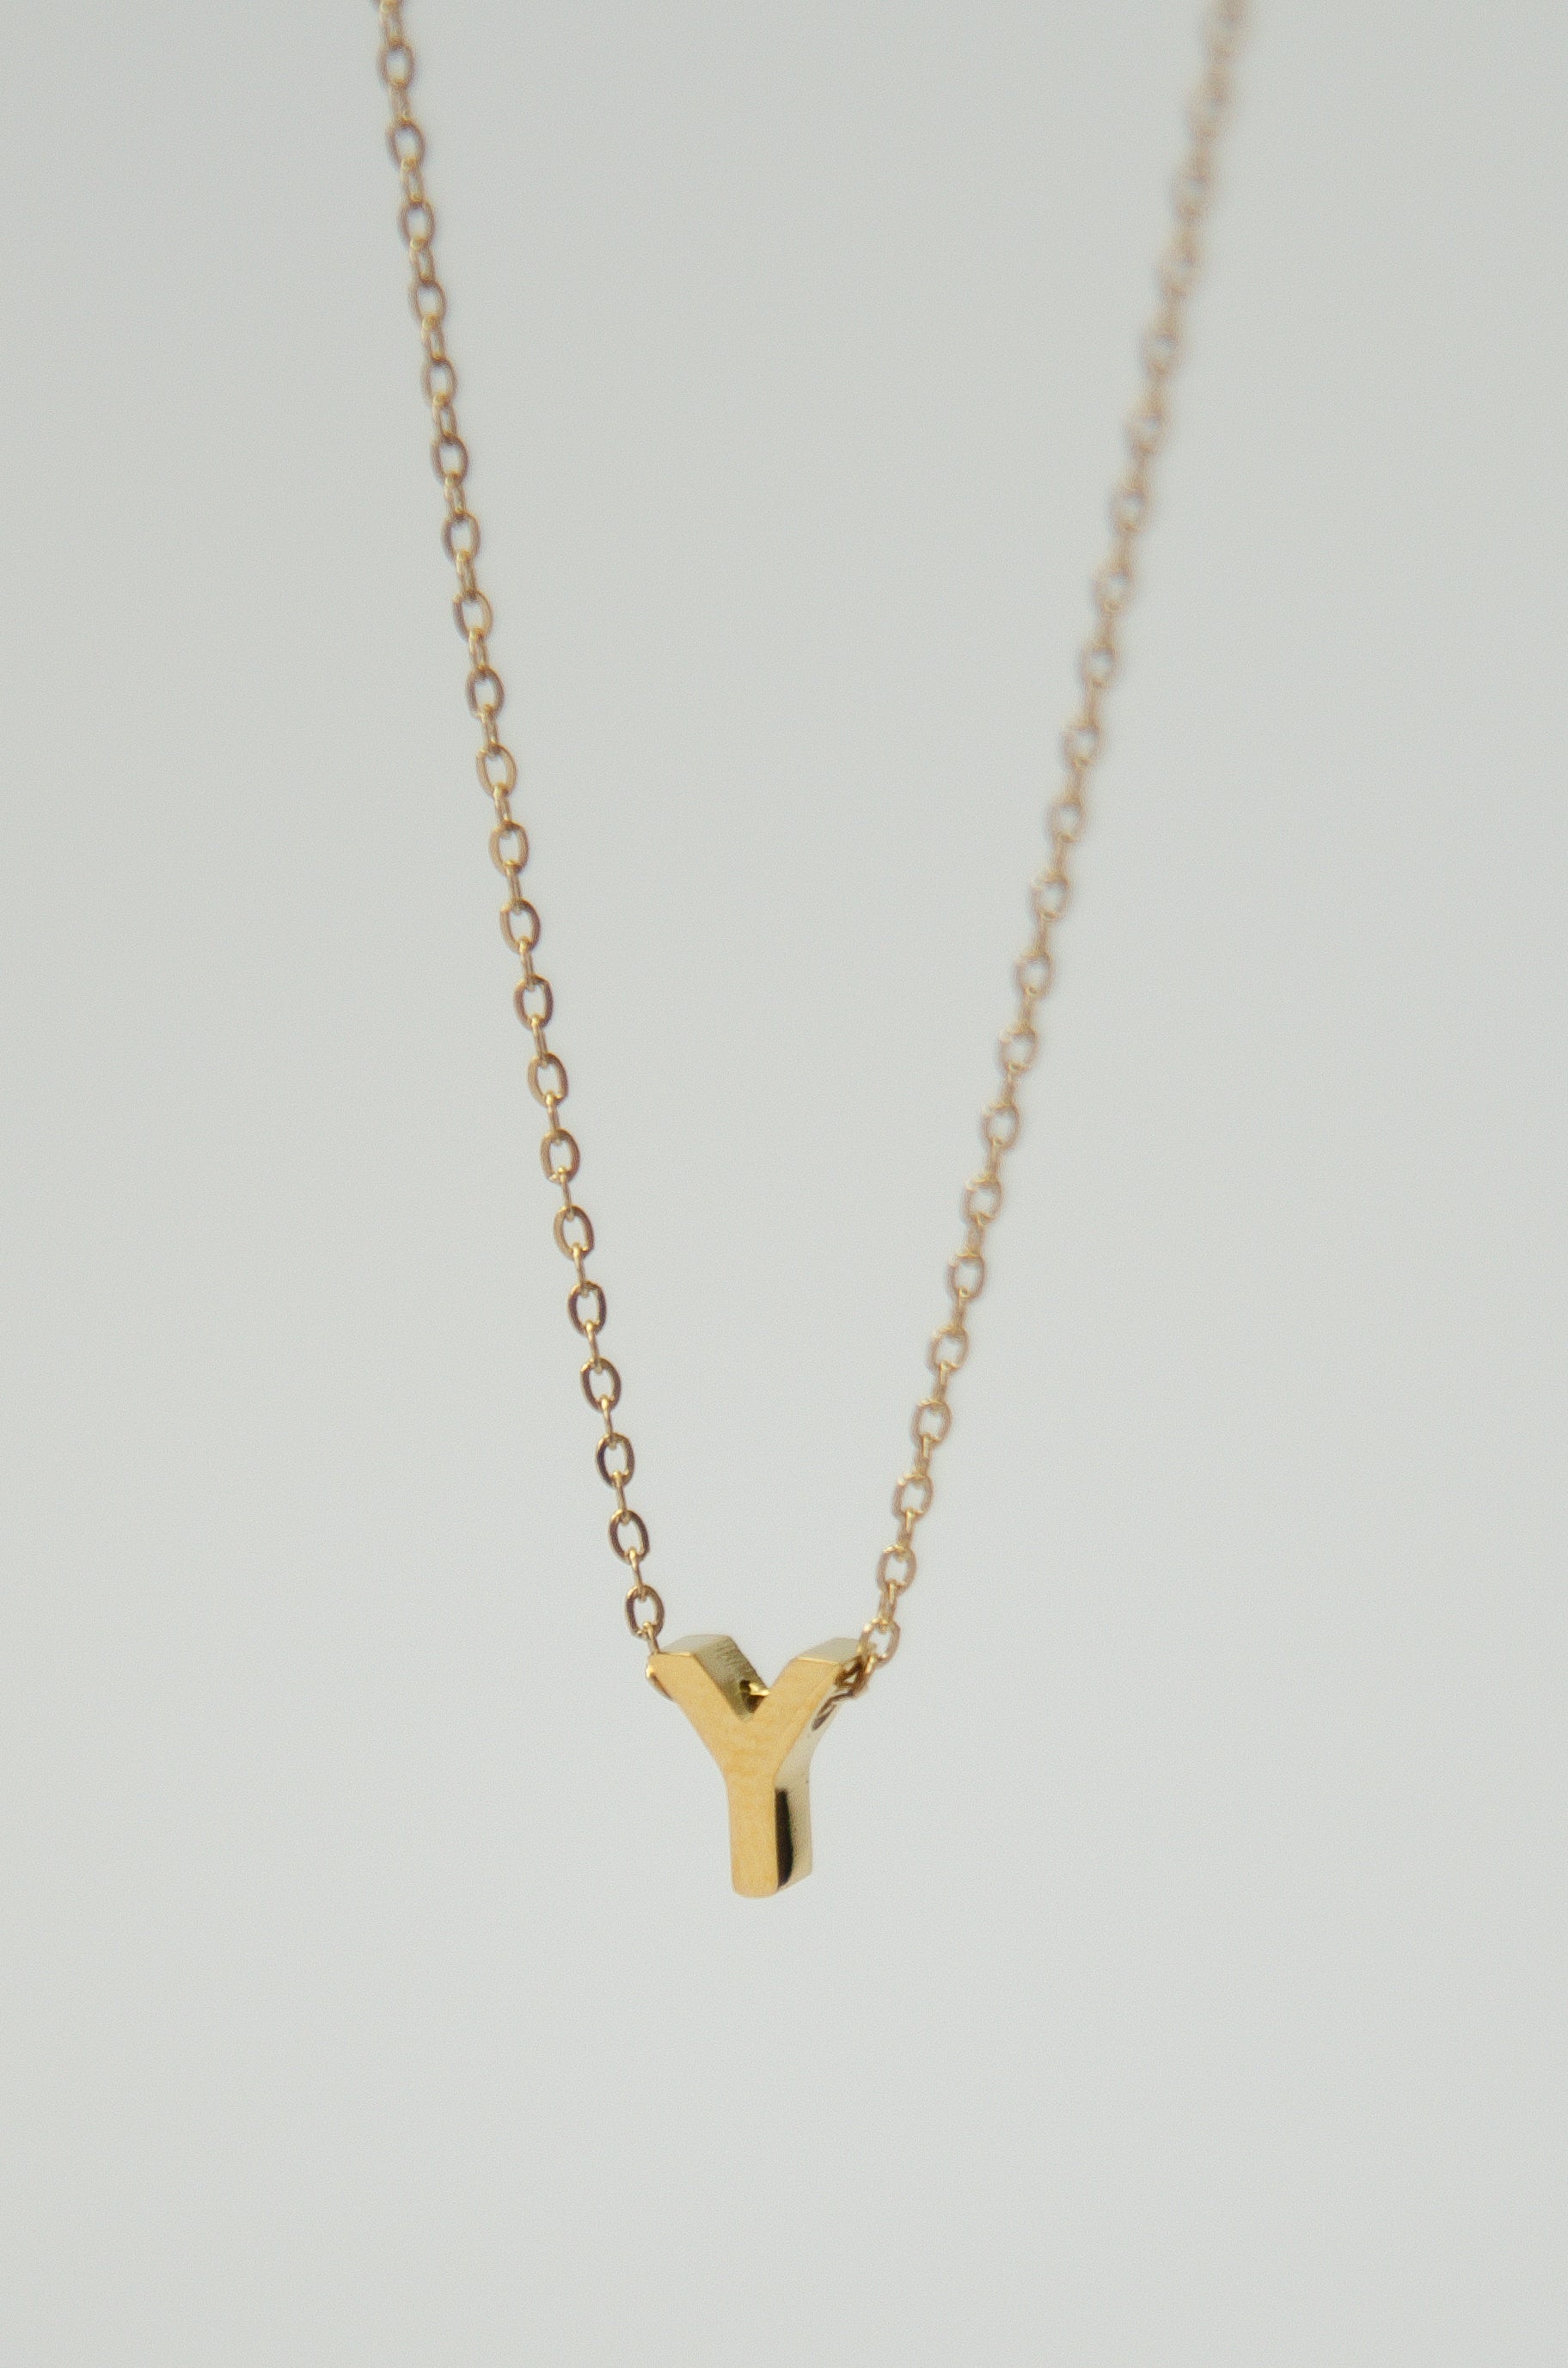 LETTERS NECKLACE // Y